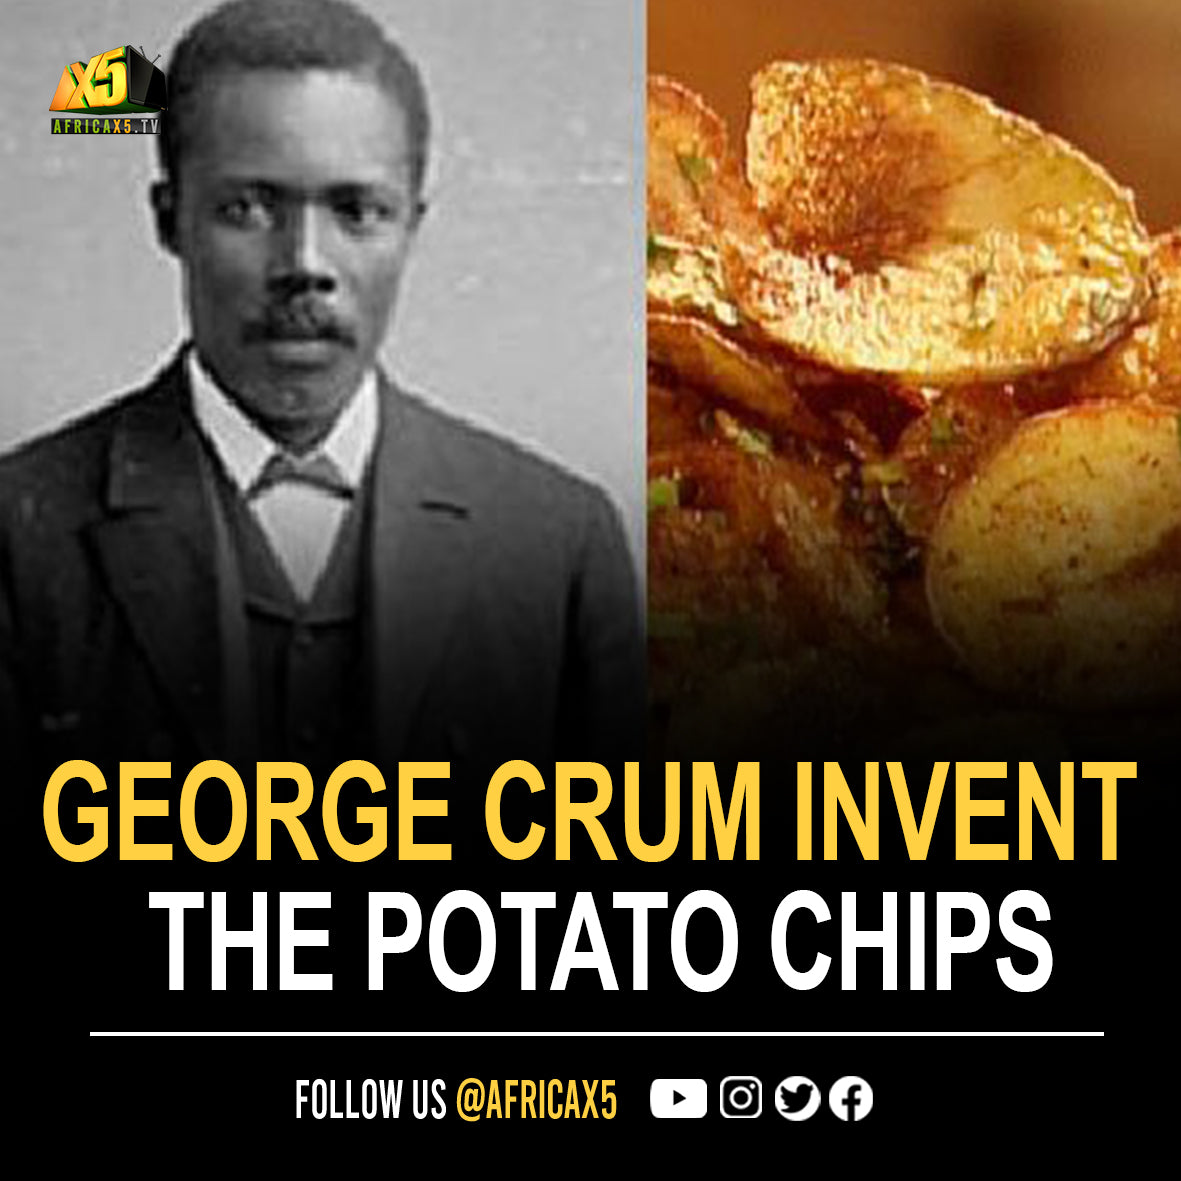 George Crum invented the Potato chips. Thanks to him, our mindless television watching became a bit more delicious.